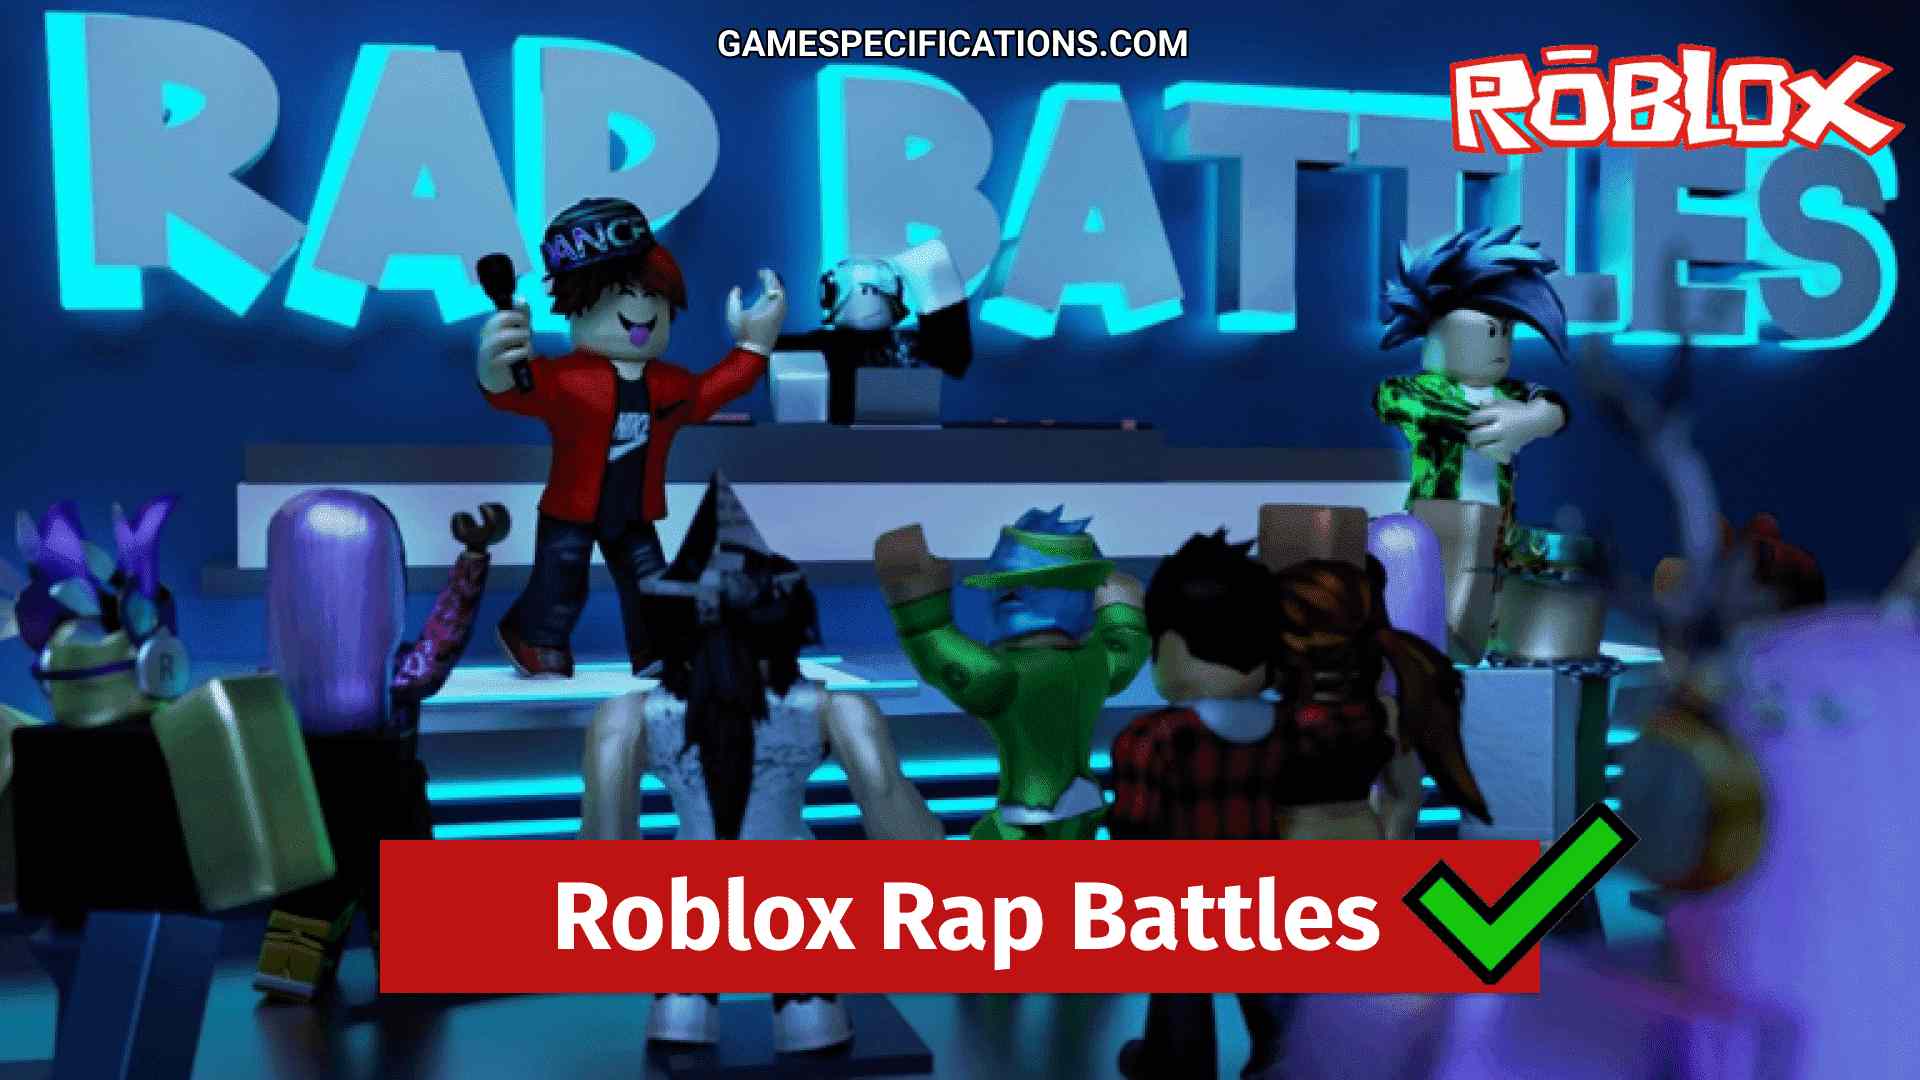 Awesome Roblox Rap Battles Explained With Lyrics Game Specifications - raps for rap battles roblox